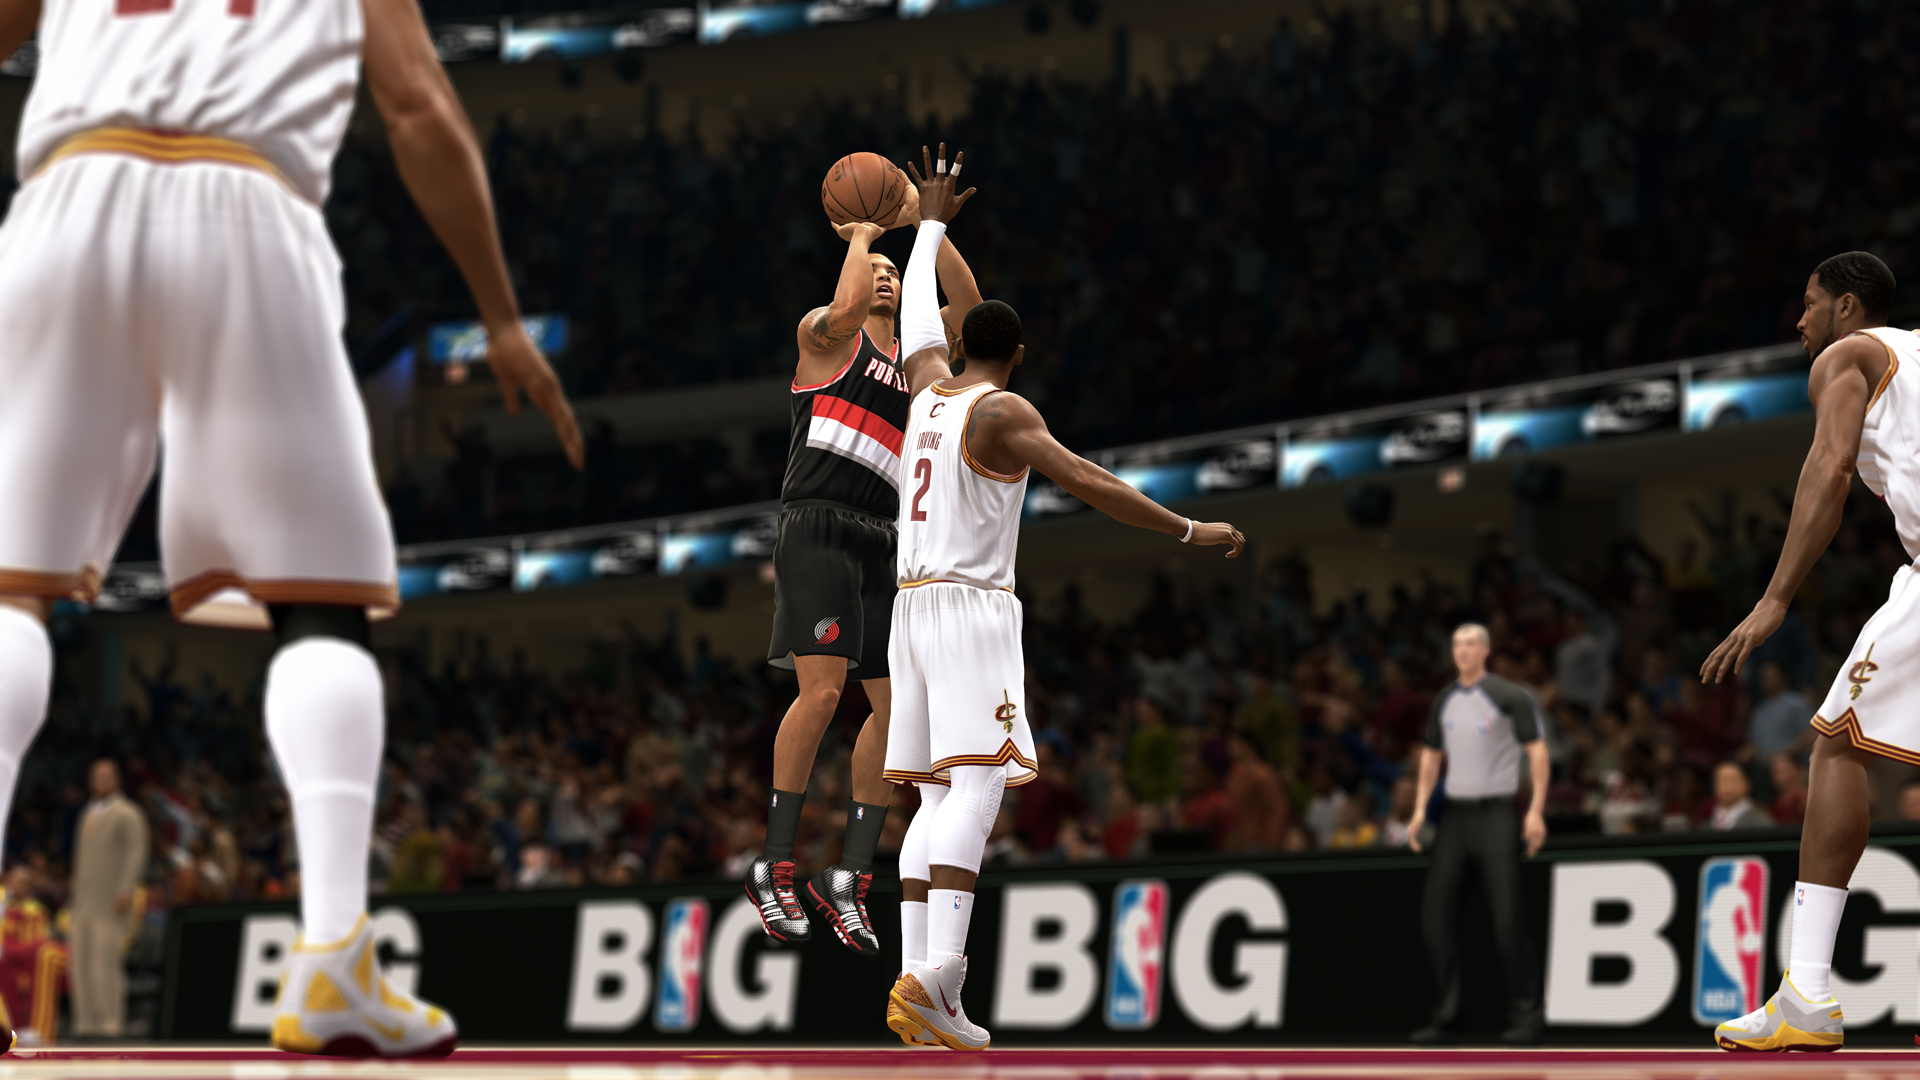 Nba Live 14 Ps4 Gameplay